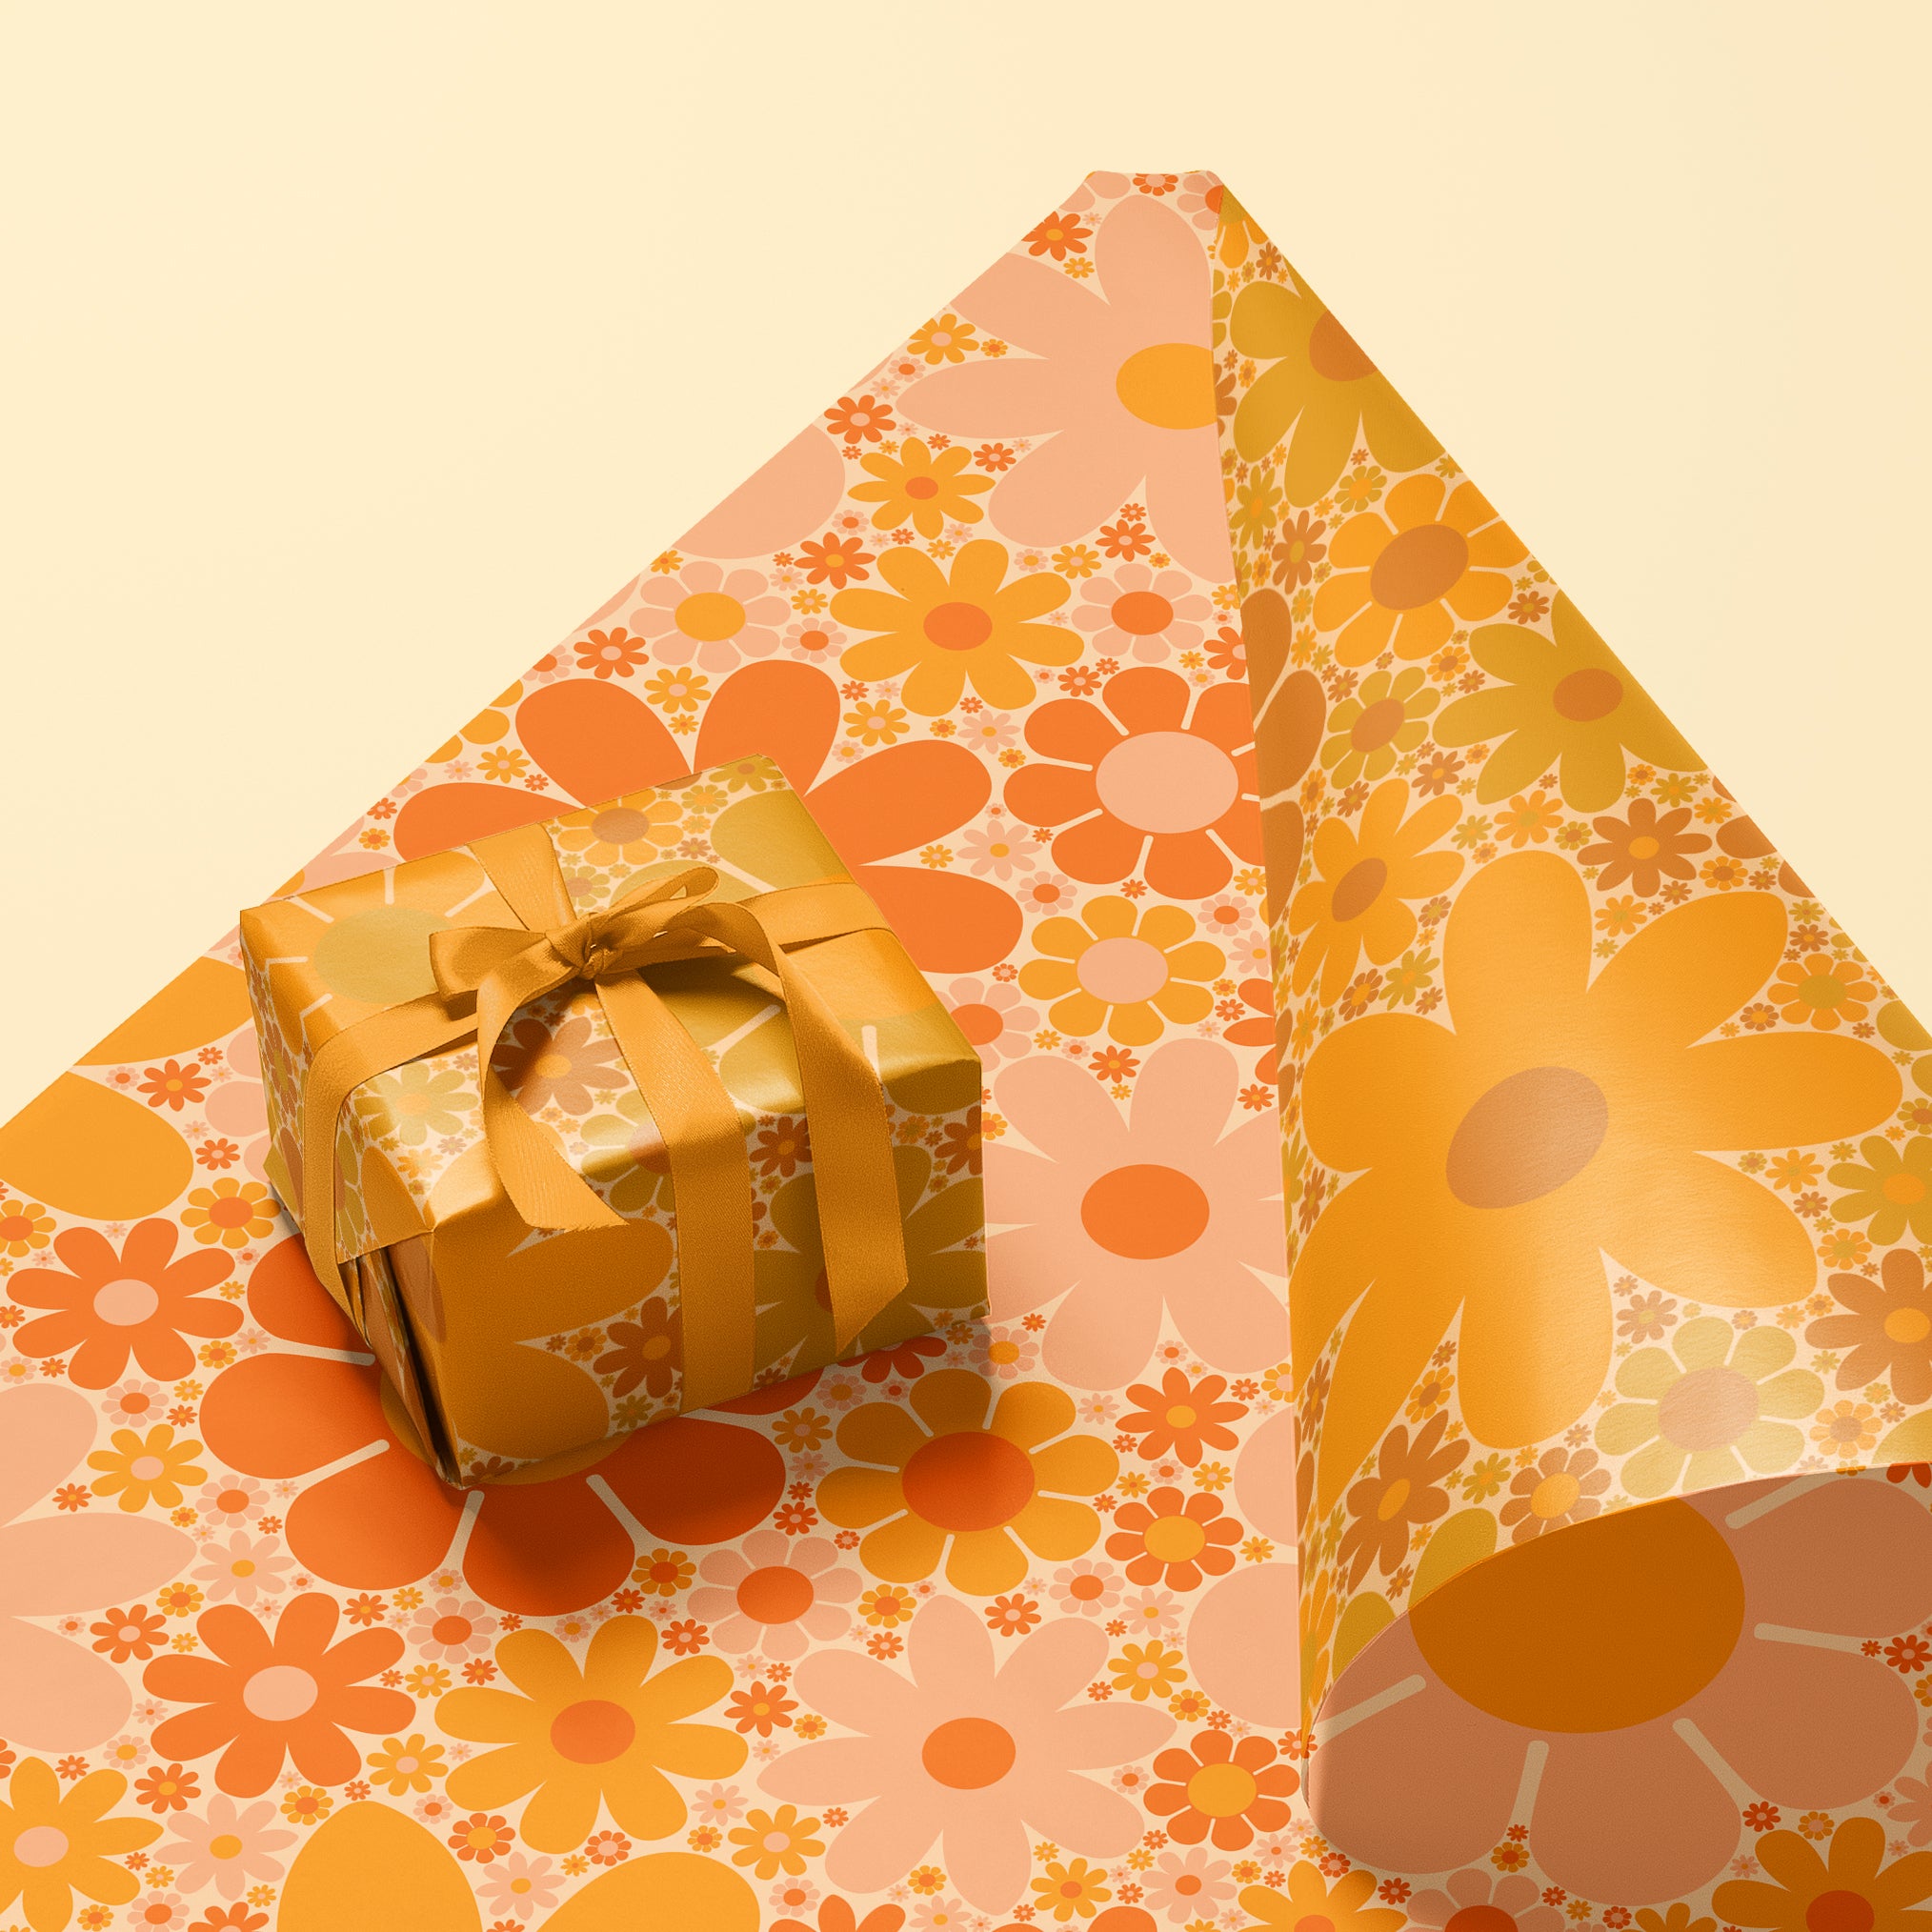 Sheet of wrapping paper filled with orange and yellow flower print. The sheet is bent forward, revealing the other side of the wrapping paper. The back side is covered in the same floral print in pink and oranges.